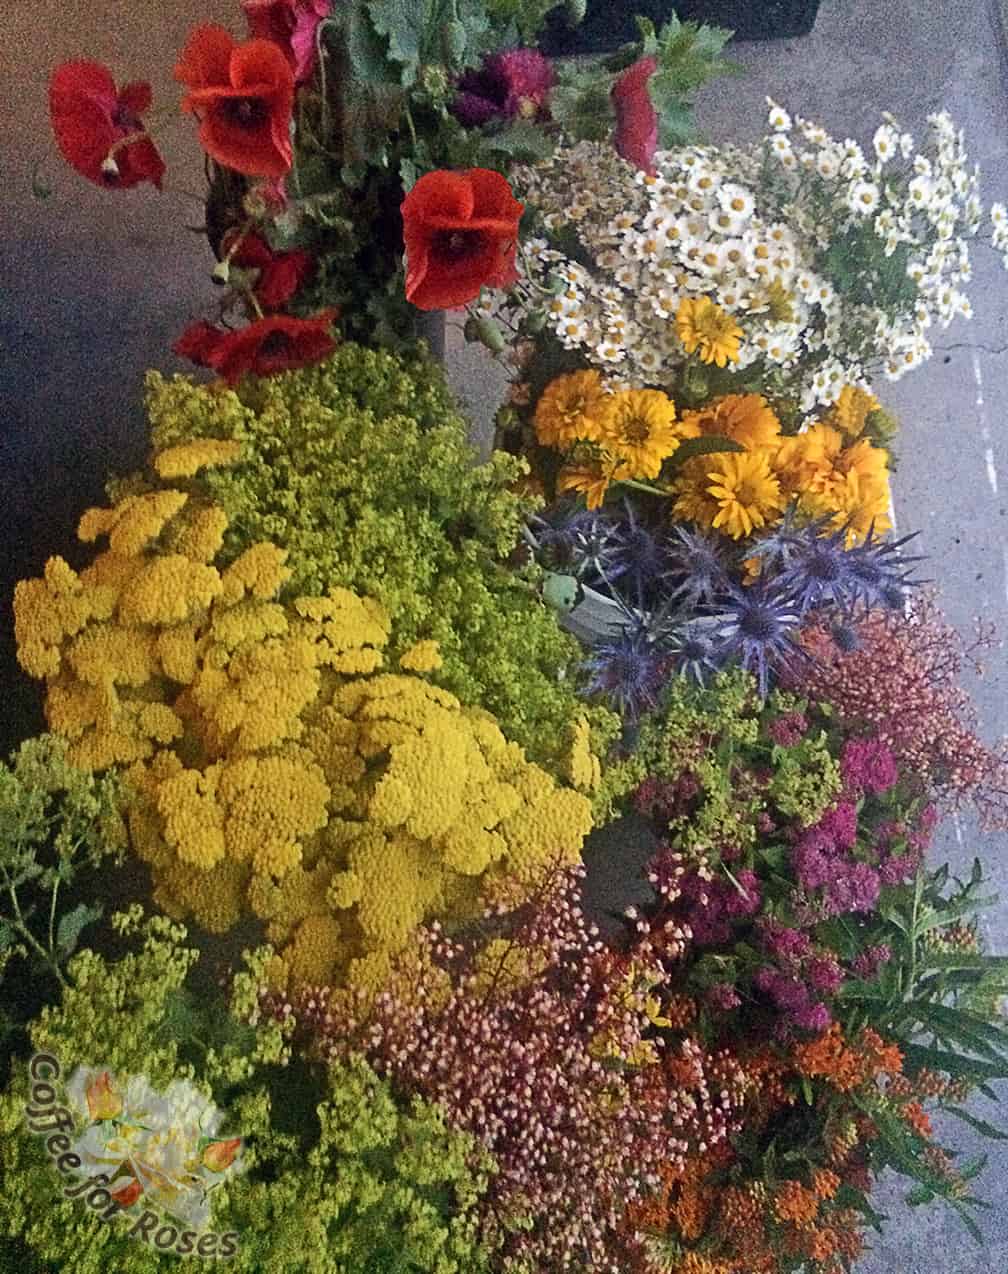 Here are some of the flowers I picked from my gardens, top to bottom: corn poppies, feverfew, heliopsis, lady's mantle, yarrow, blue sea holly, heuchera, spirea, and butterfly weed. 